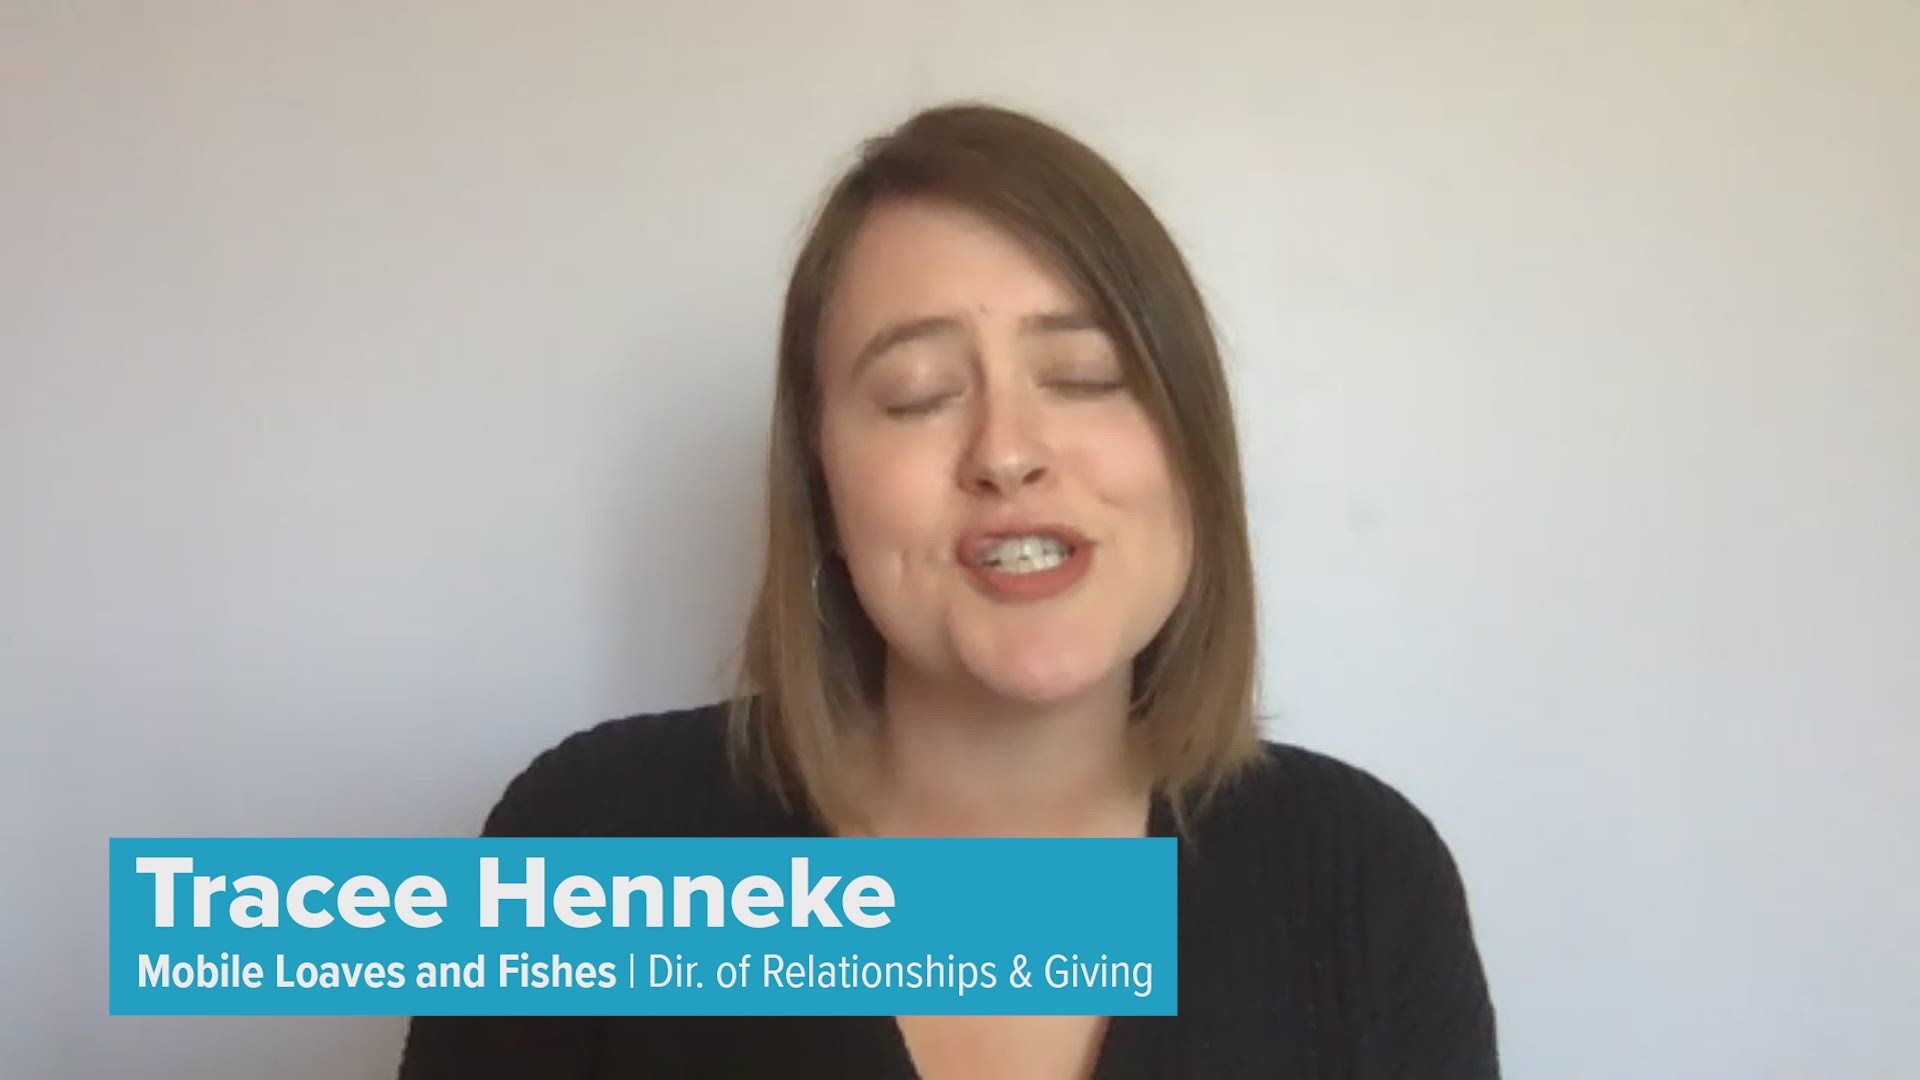 Interview with Mobile Loaves & Fishes' Director of Relationships & Giving, Tracee Henneke